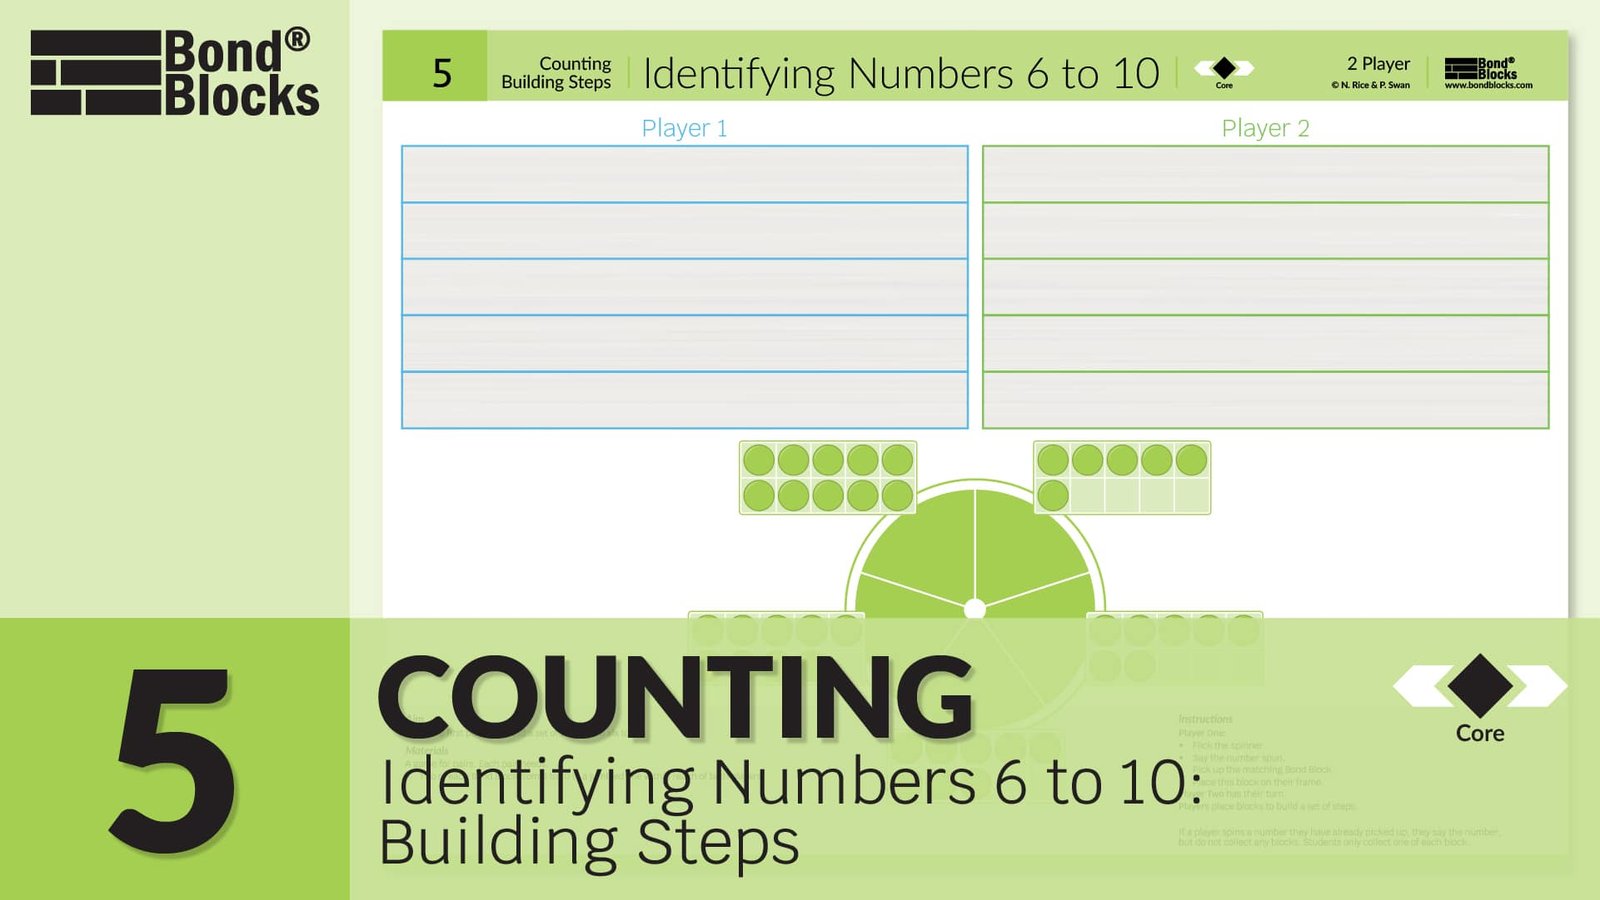 5.1 Identifying Numbers 6 To 10 Building Steps